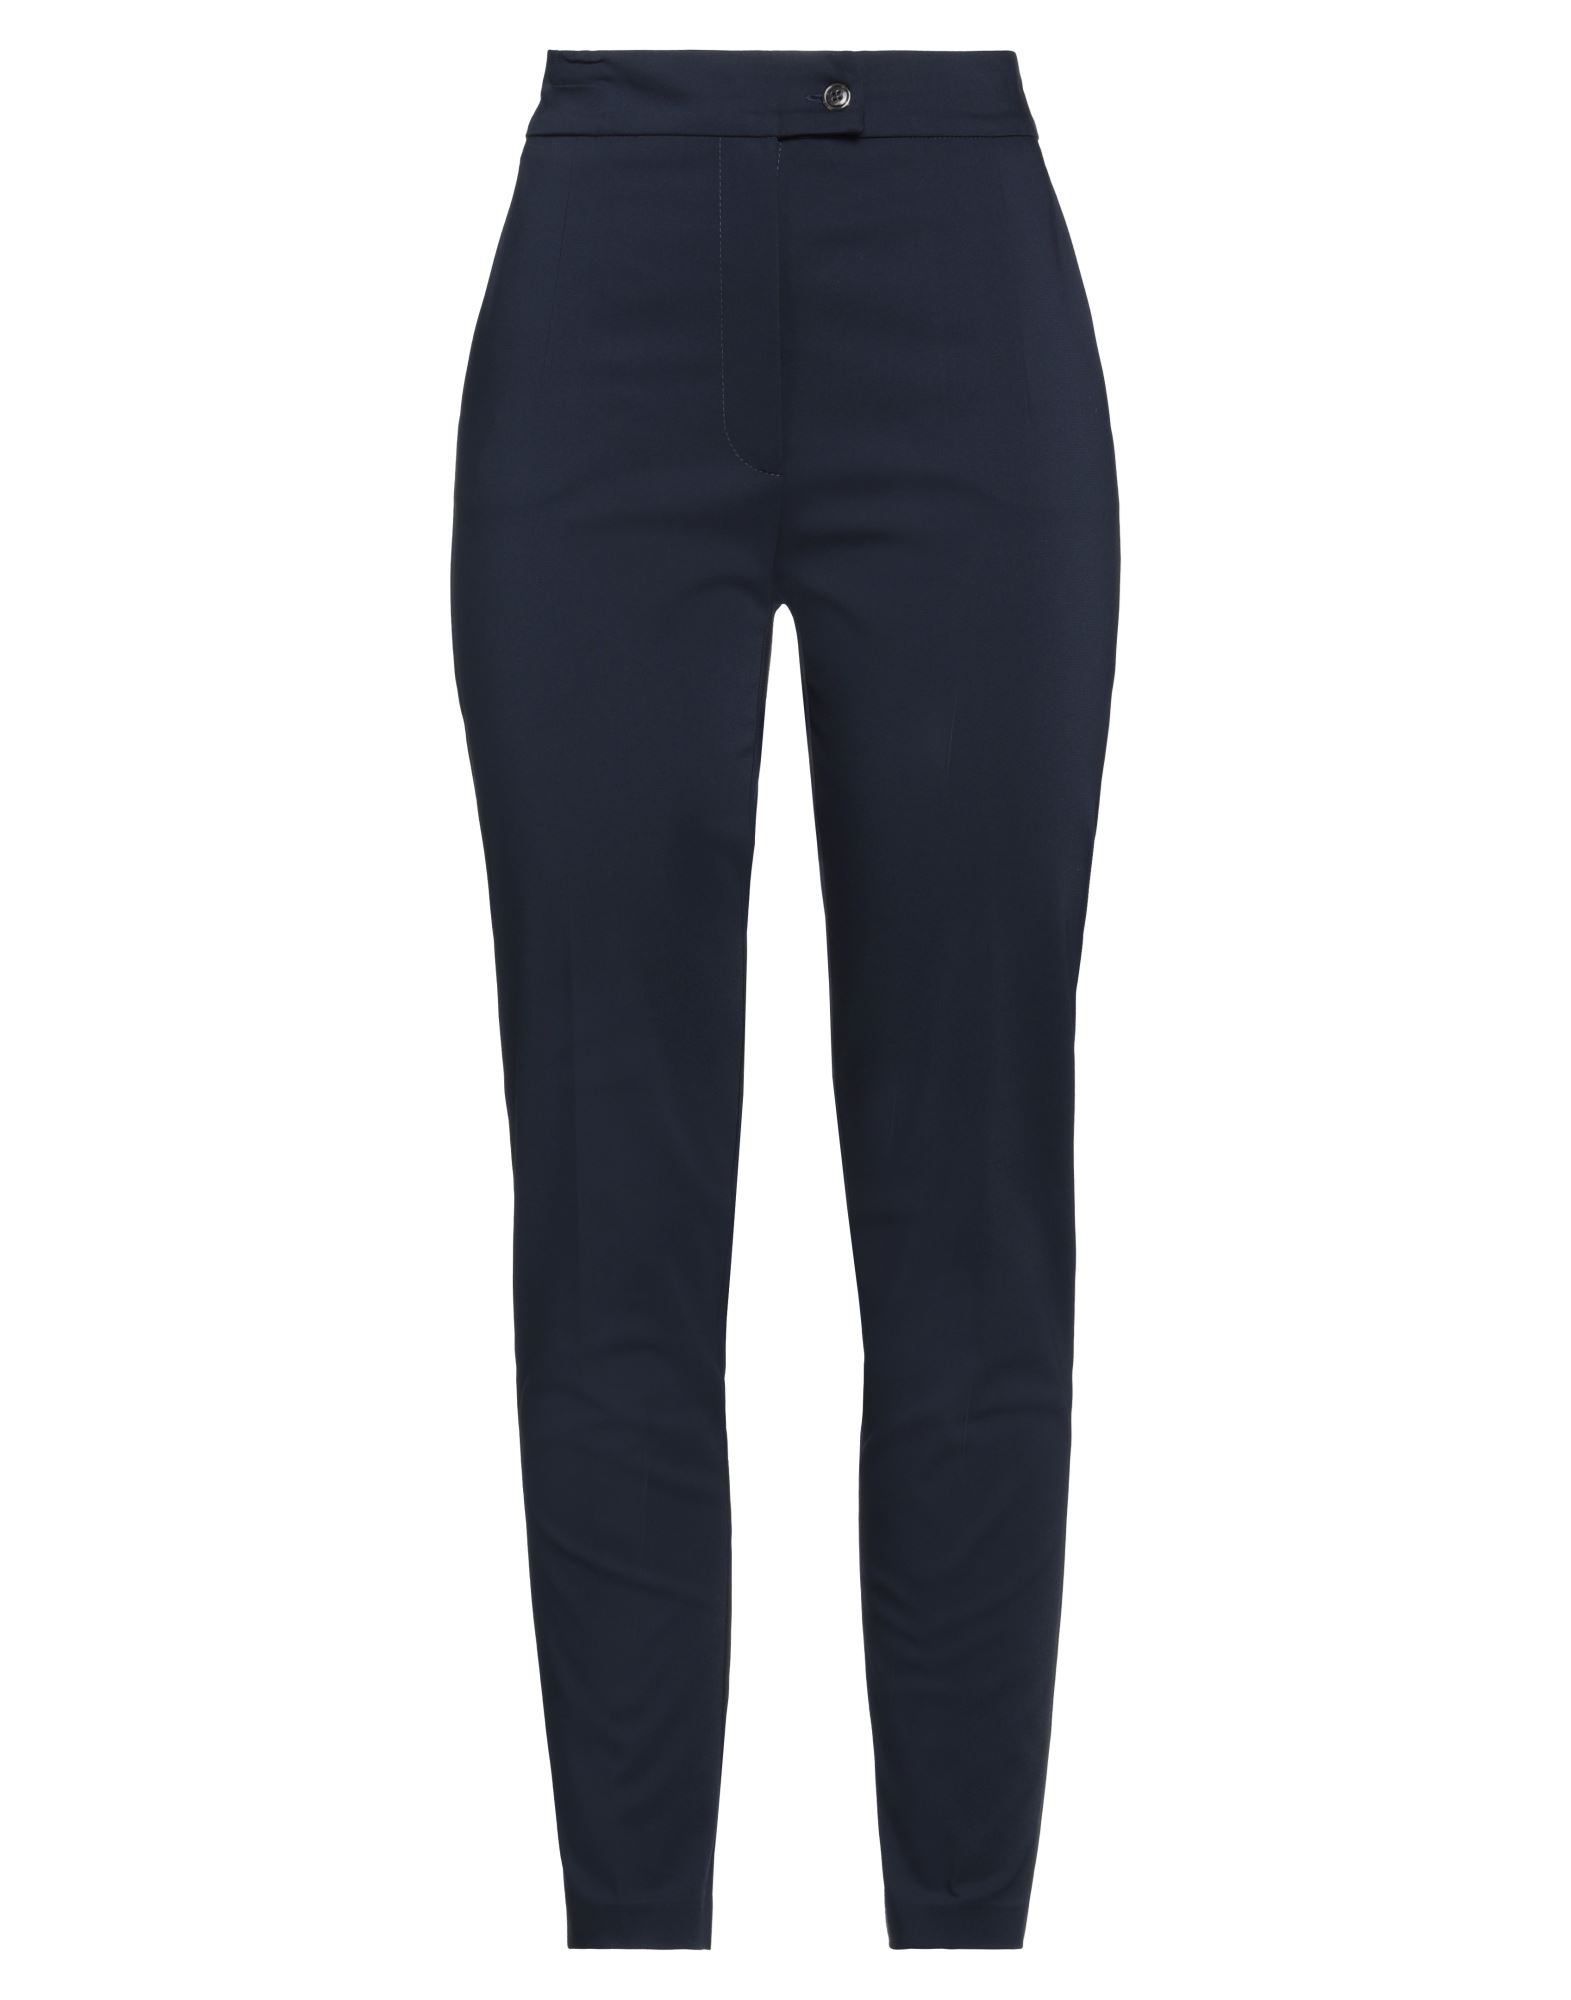 Access Fashion Pants In Blue